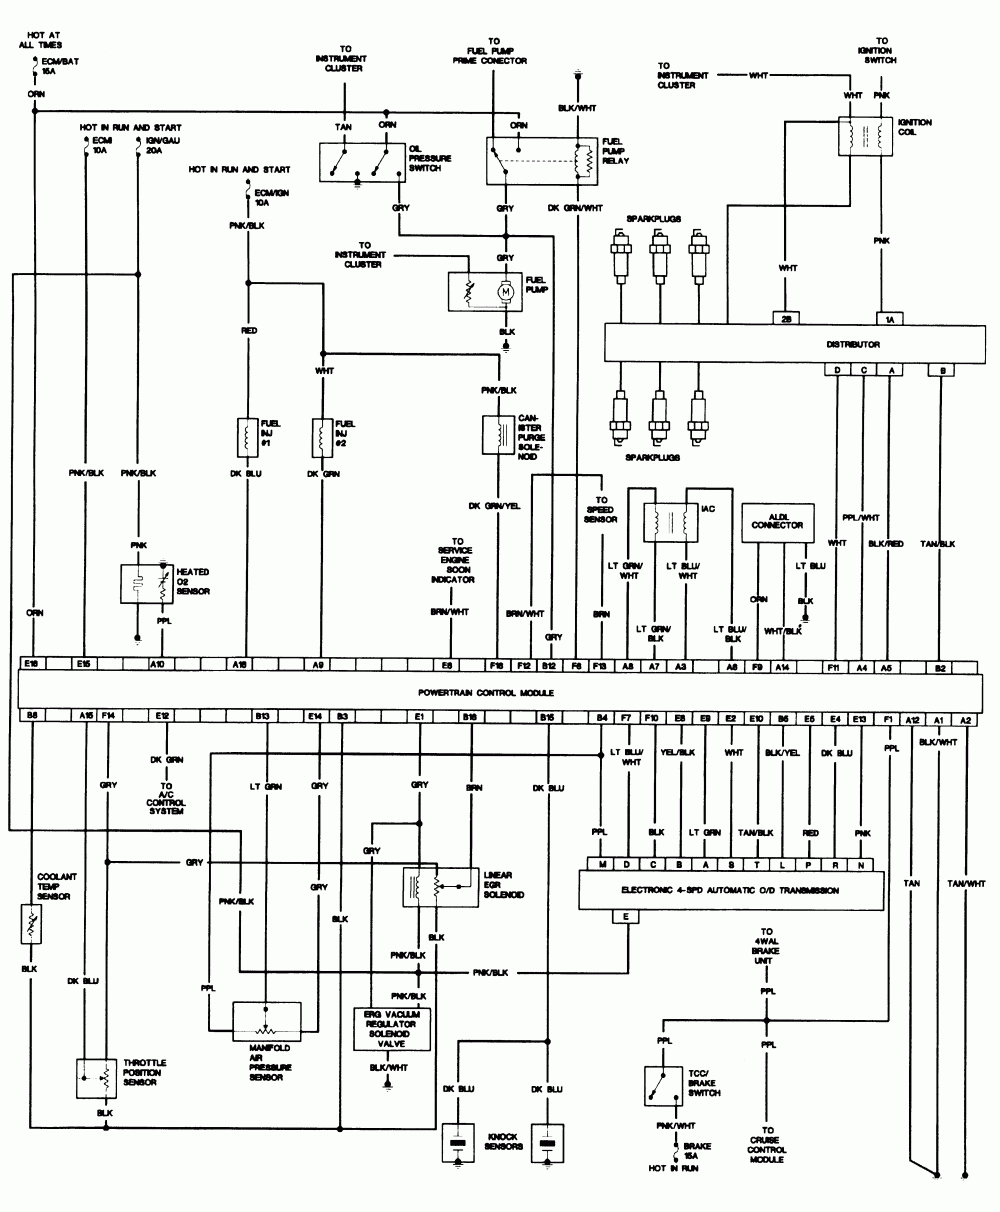 Repair Guides | Wiring Diagrams | Wiring Diagrams | Autozone - 4 Wire 220 Volt Wiring Diagram